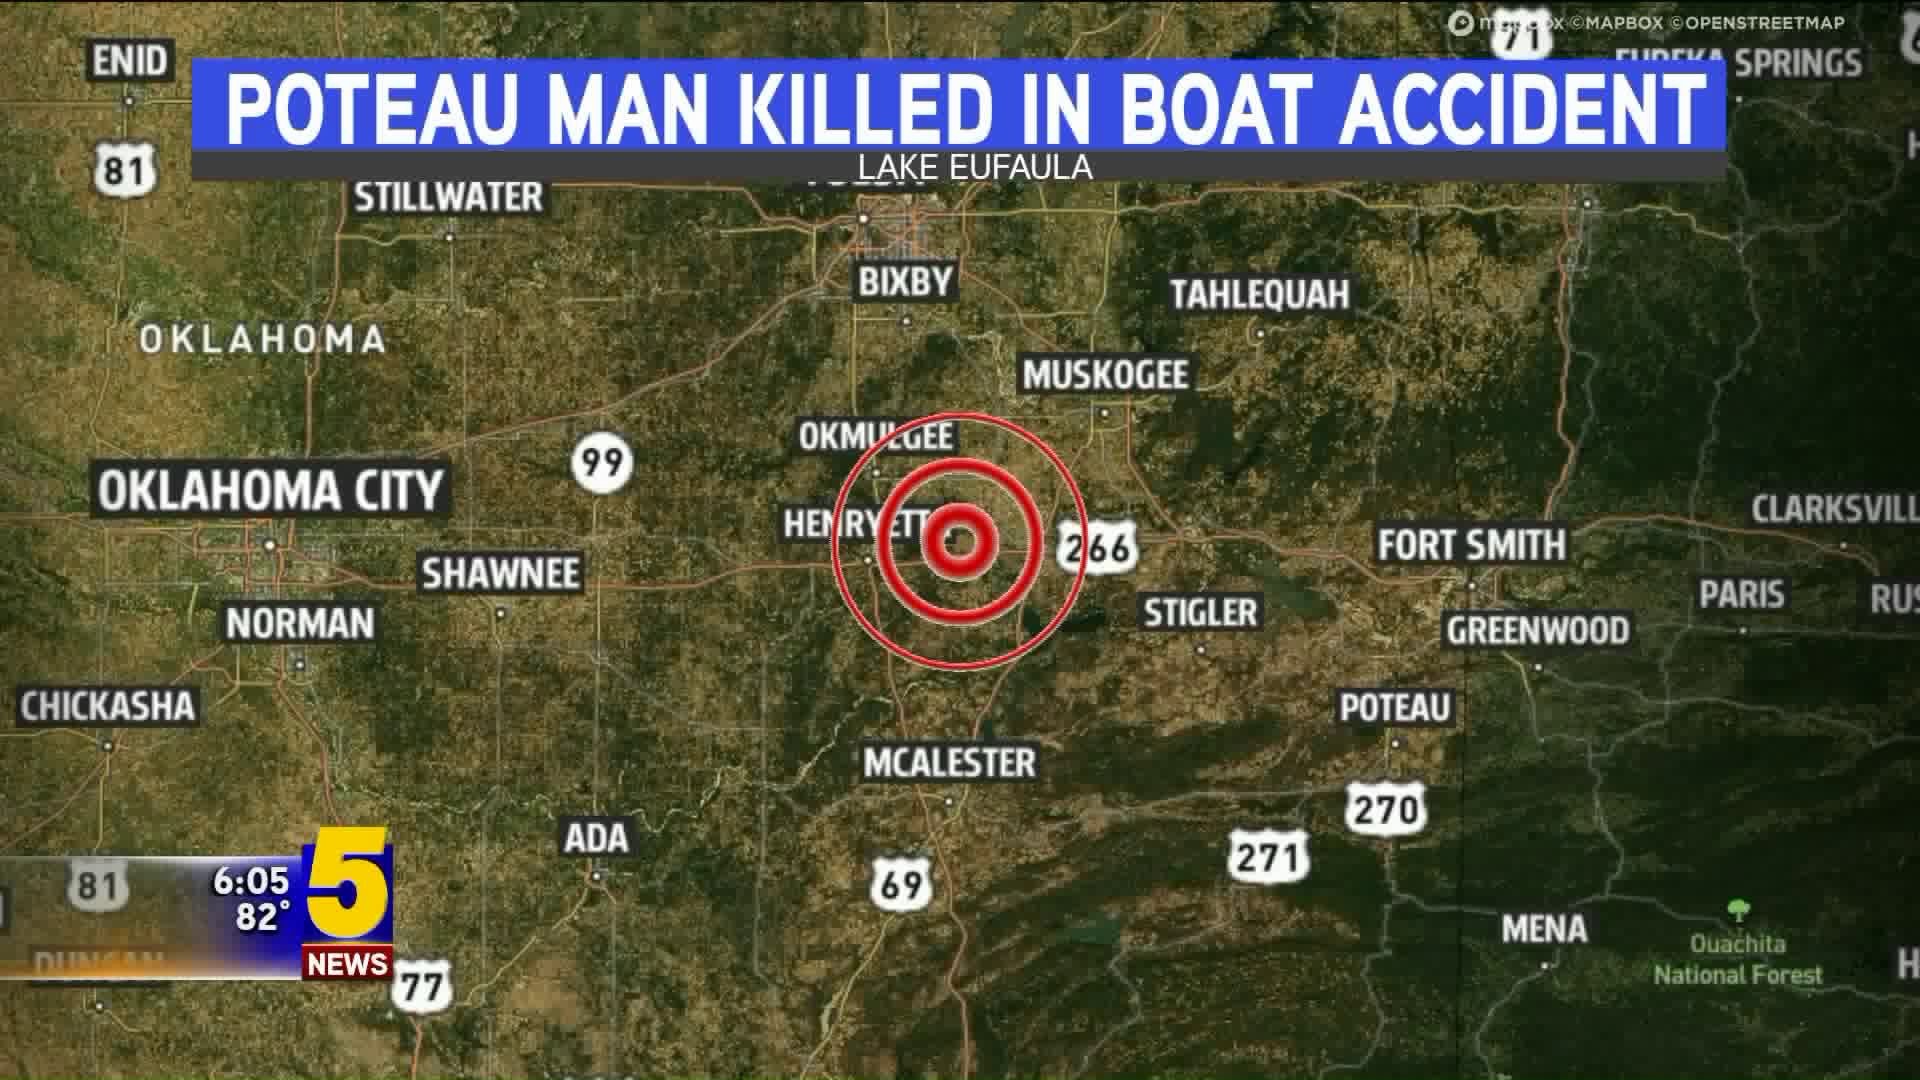 Poteau Man Killed In Boat Accident